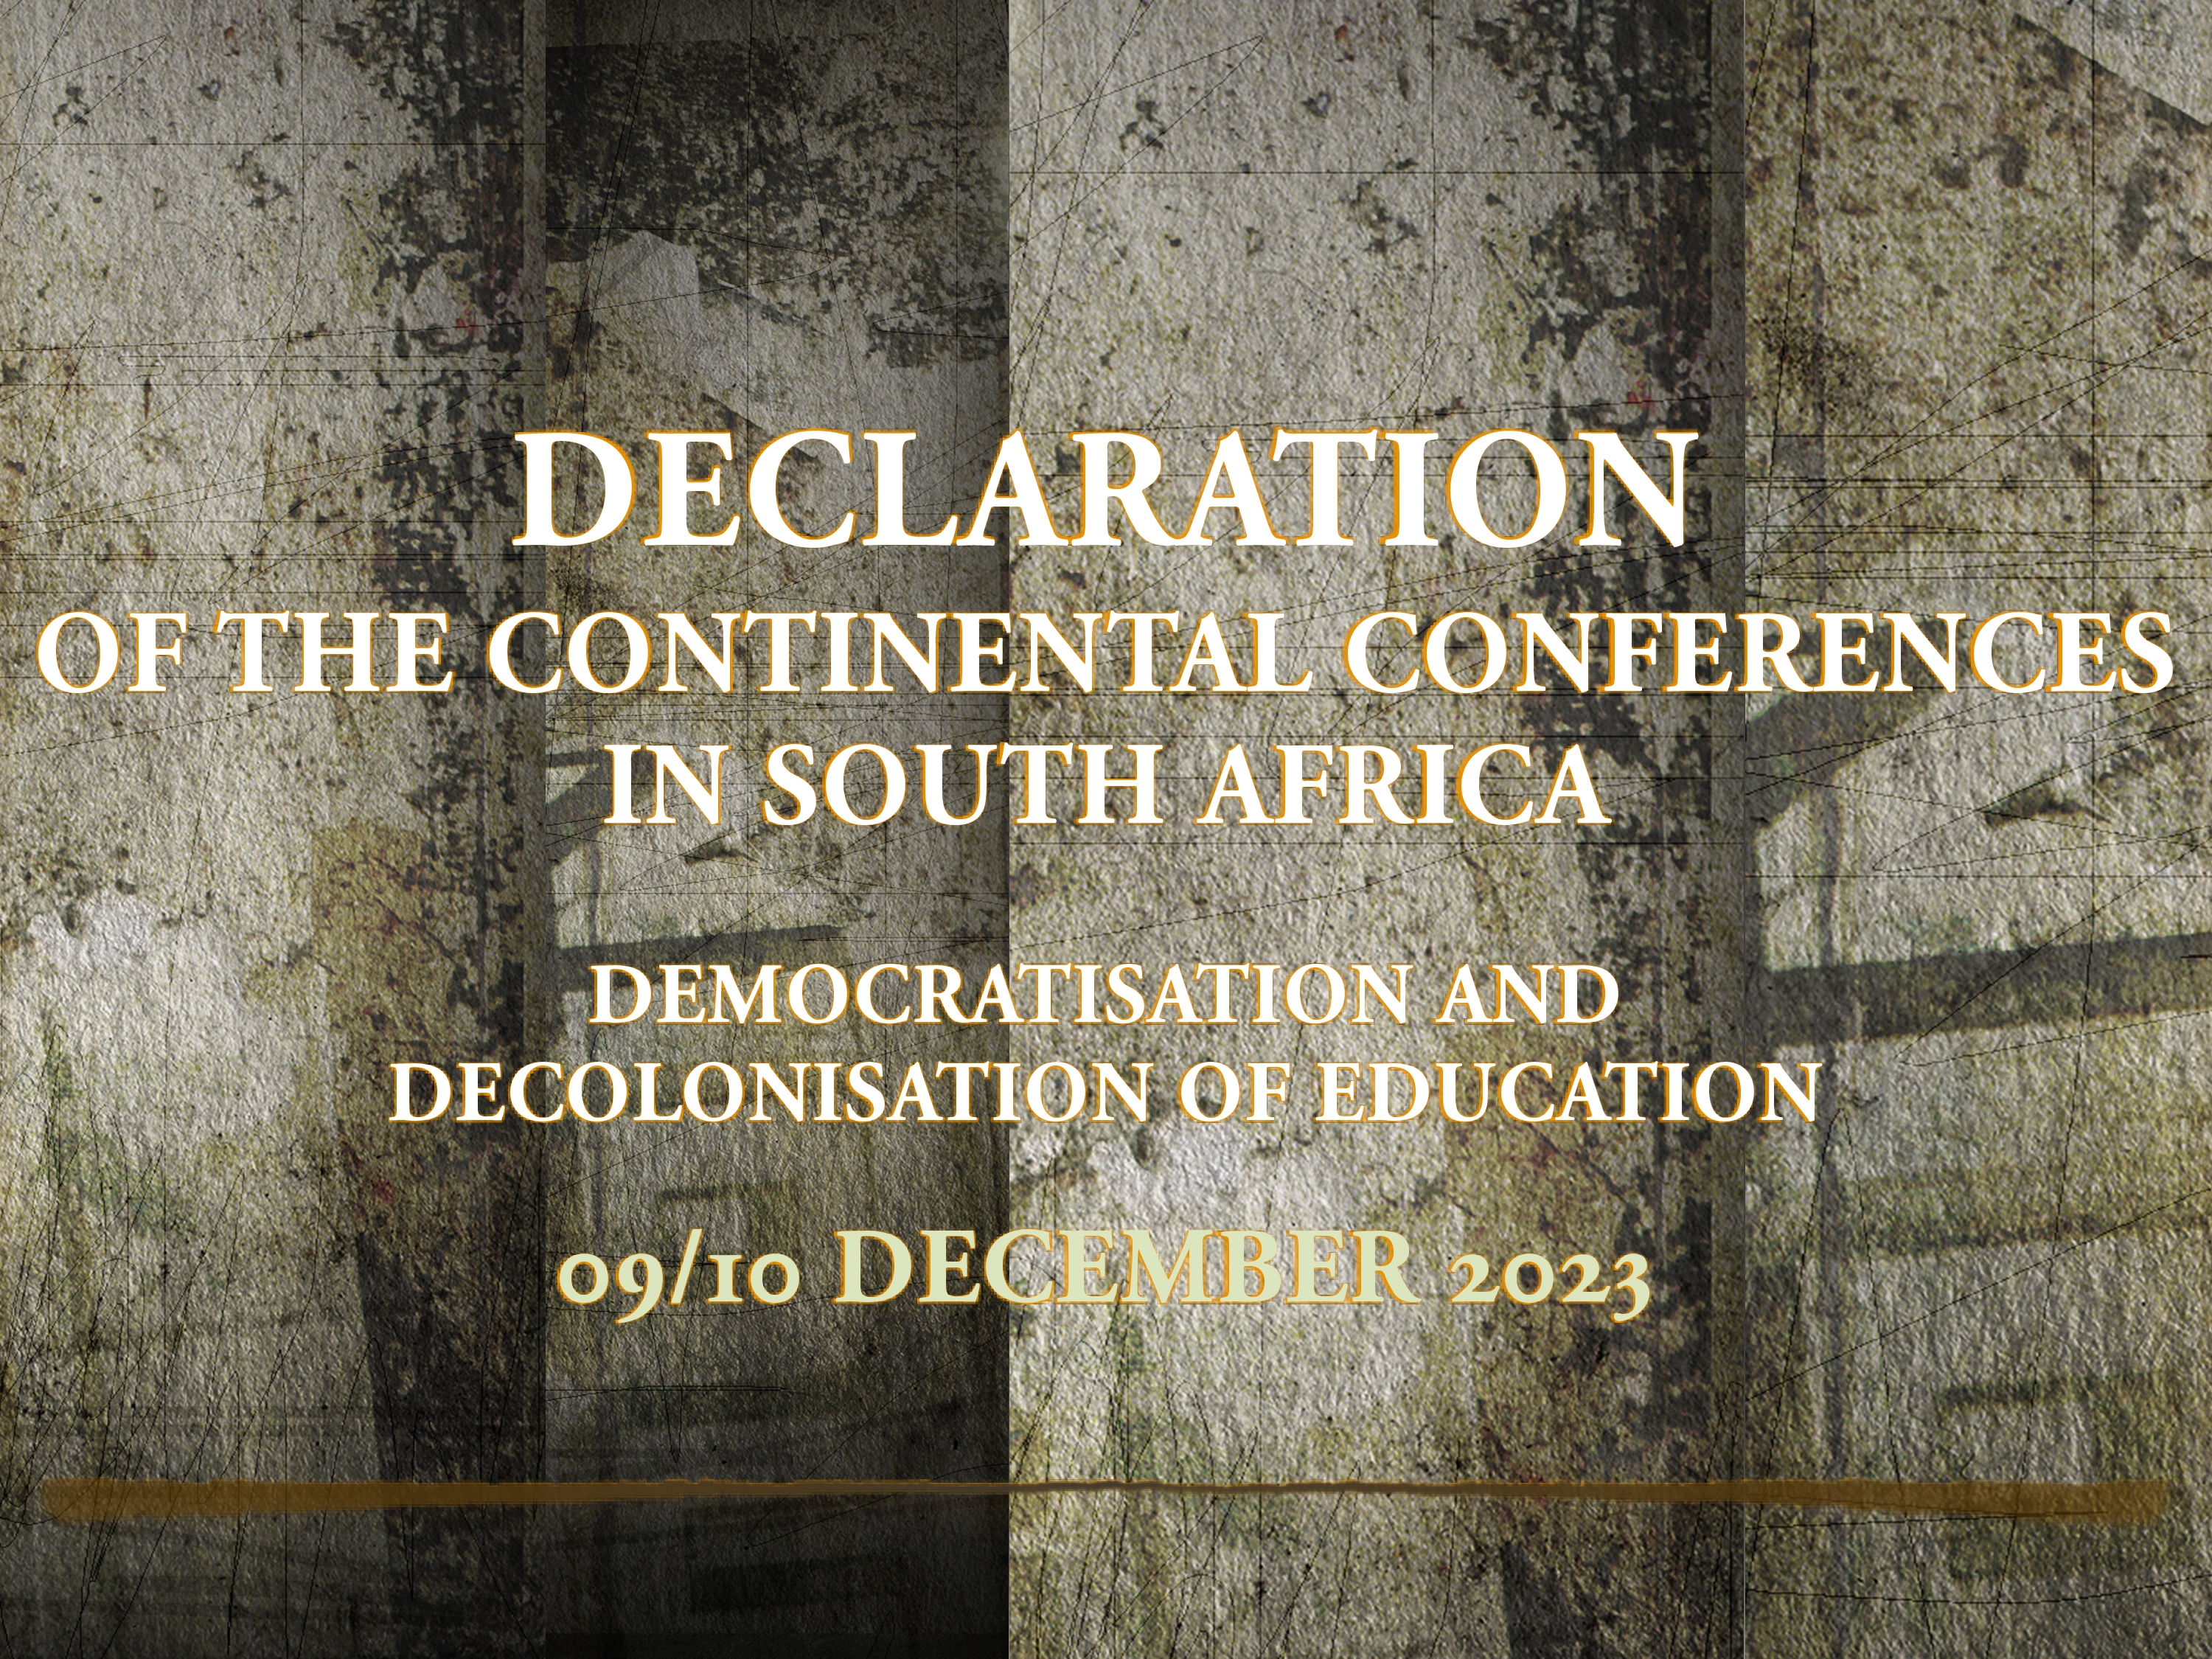 Declaration of the Continental Conferences in South Africa